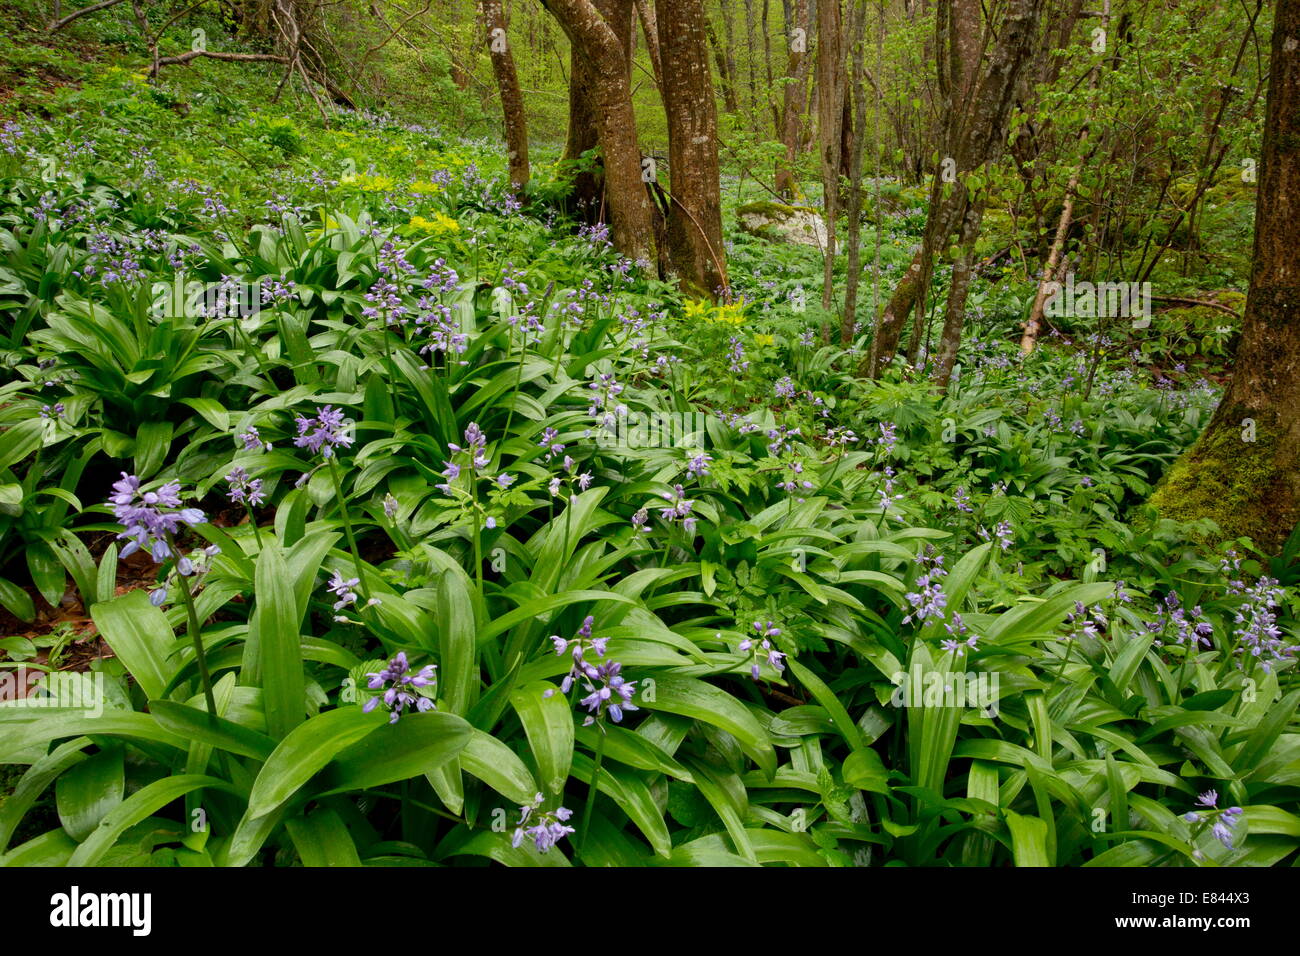 Pyrenean Squill, Scilla lilio-hyacinthus in woodland in spring, french Pyrenees. France. Stock Photo